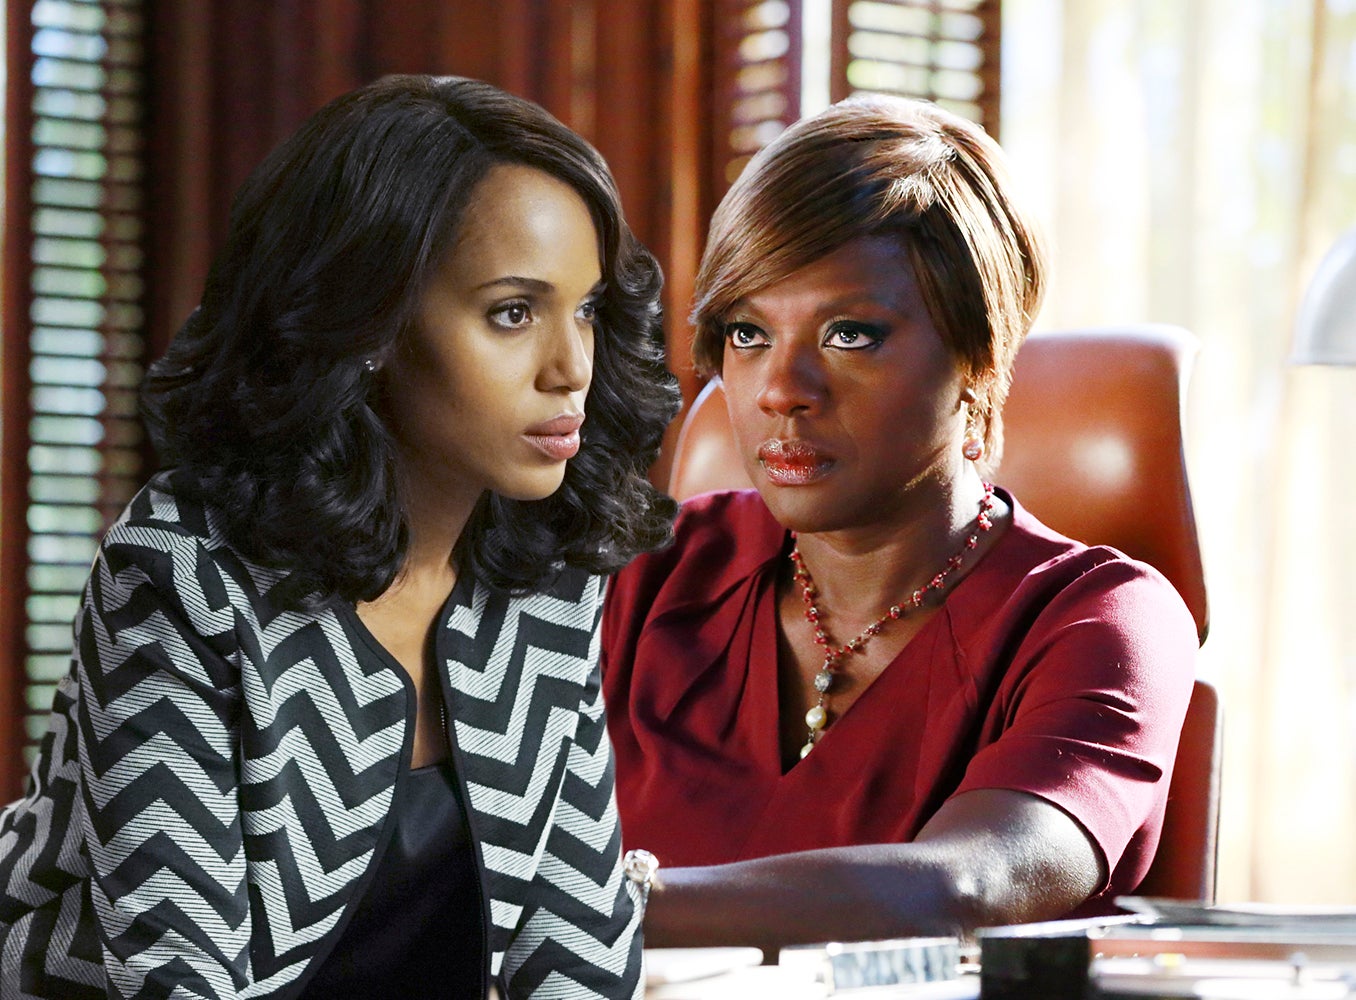 They're Back! Watch Midseason Promos for 'Scandal' and 'How to Get Away with Murder'
